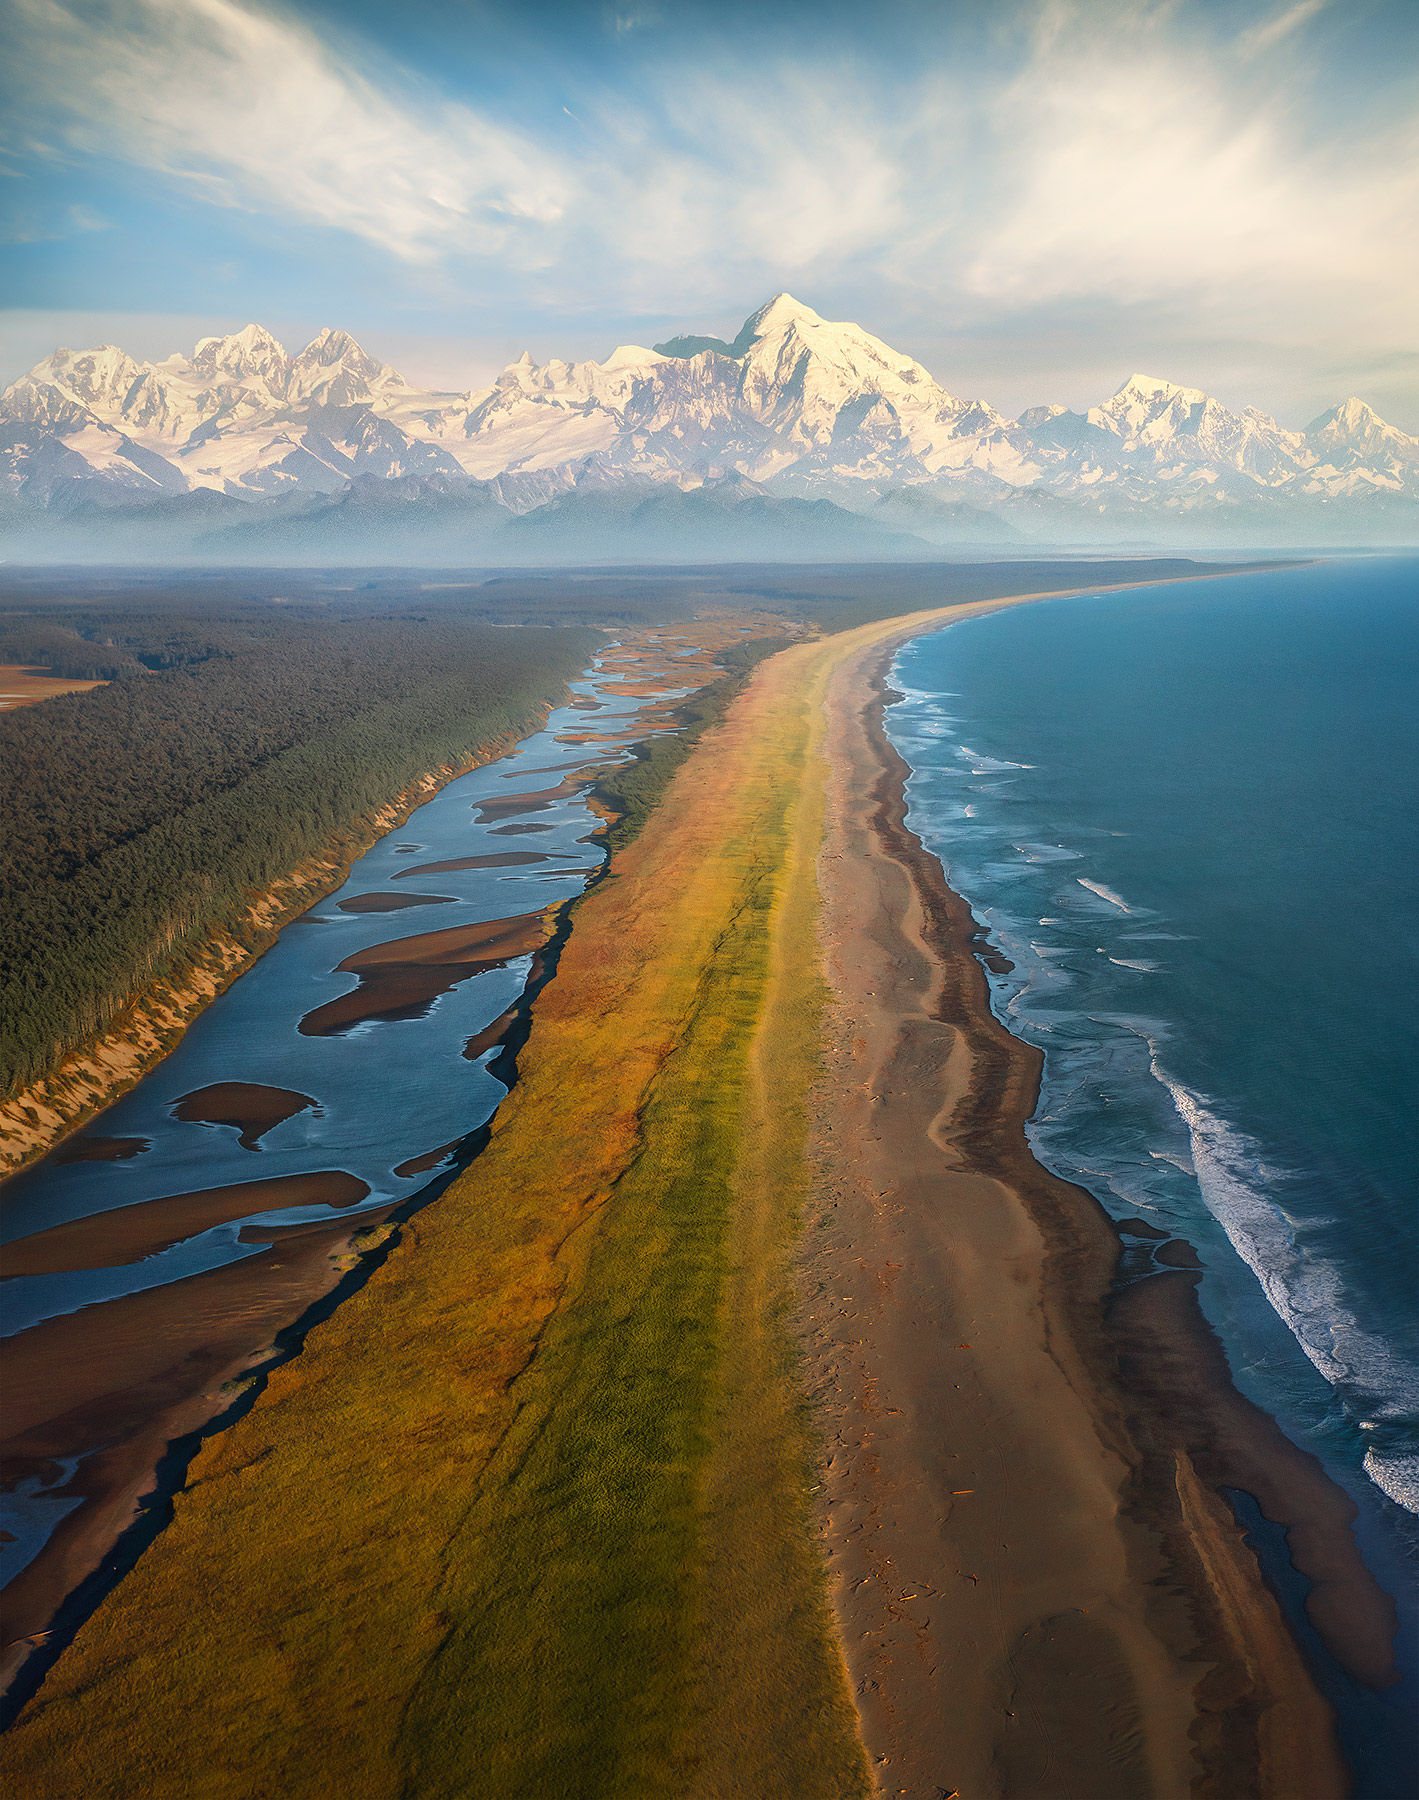 The wild Alaskan coast stretches on for miles towards the Fairweather Range in Autumn colors.